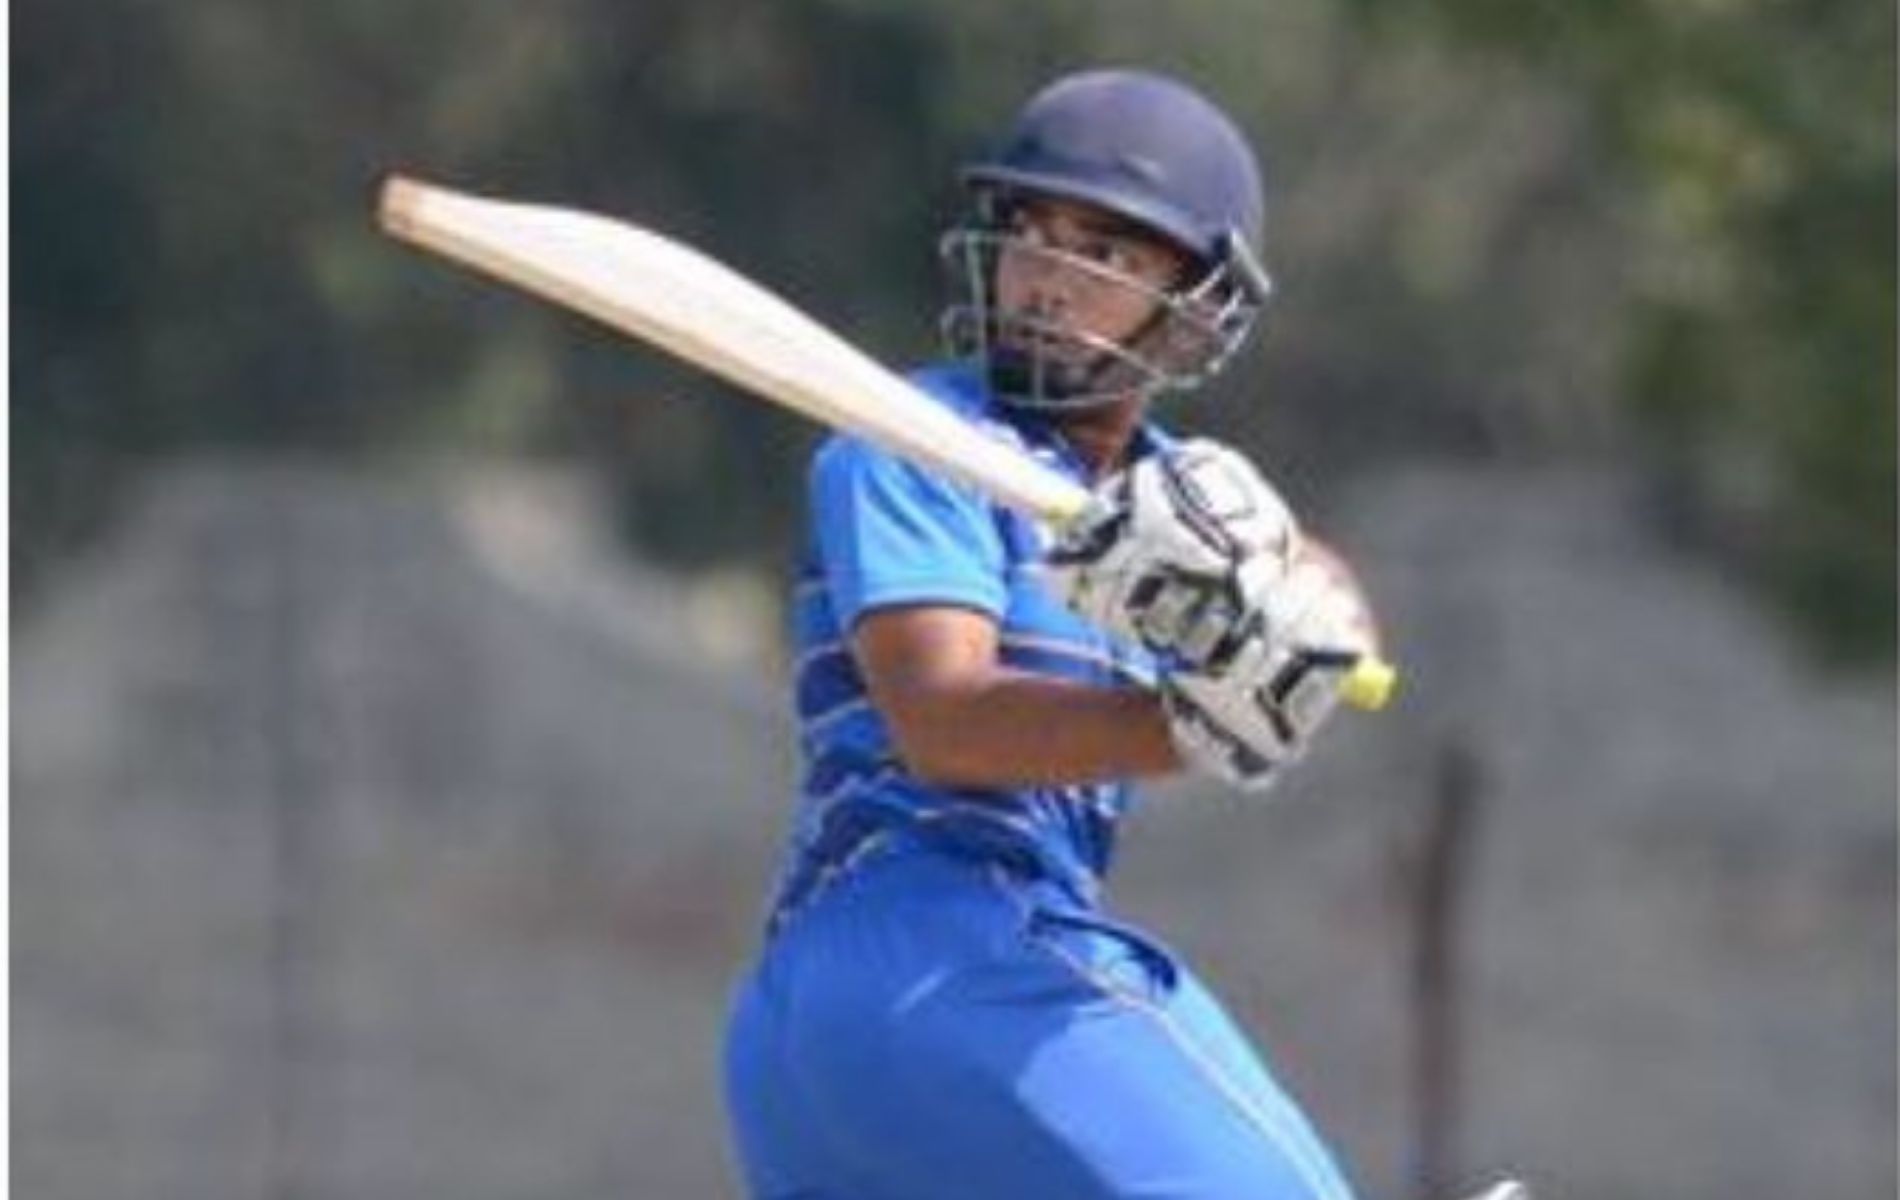 Syed Mushtaq Ali Trophy: Tanmay Agarwal led from the front and was unlucky to miss out on a century.